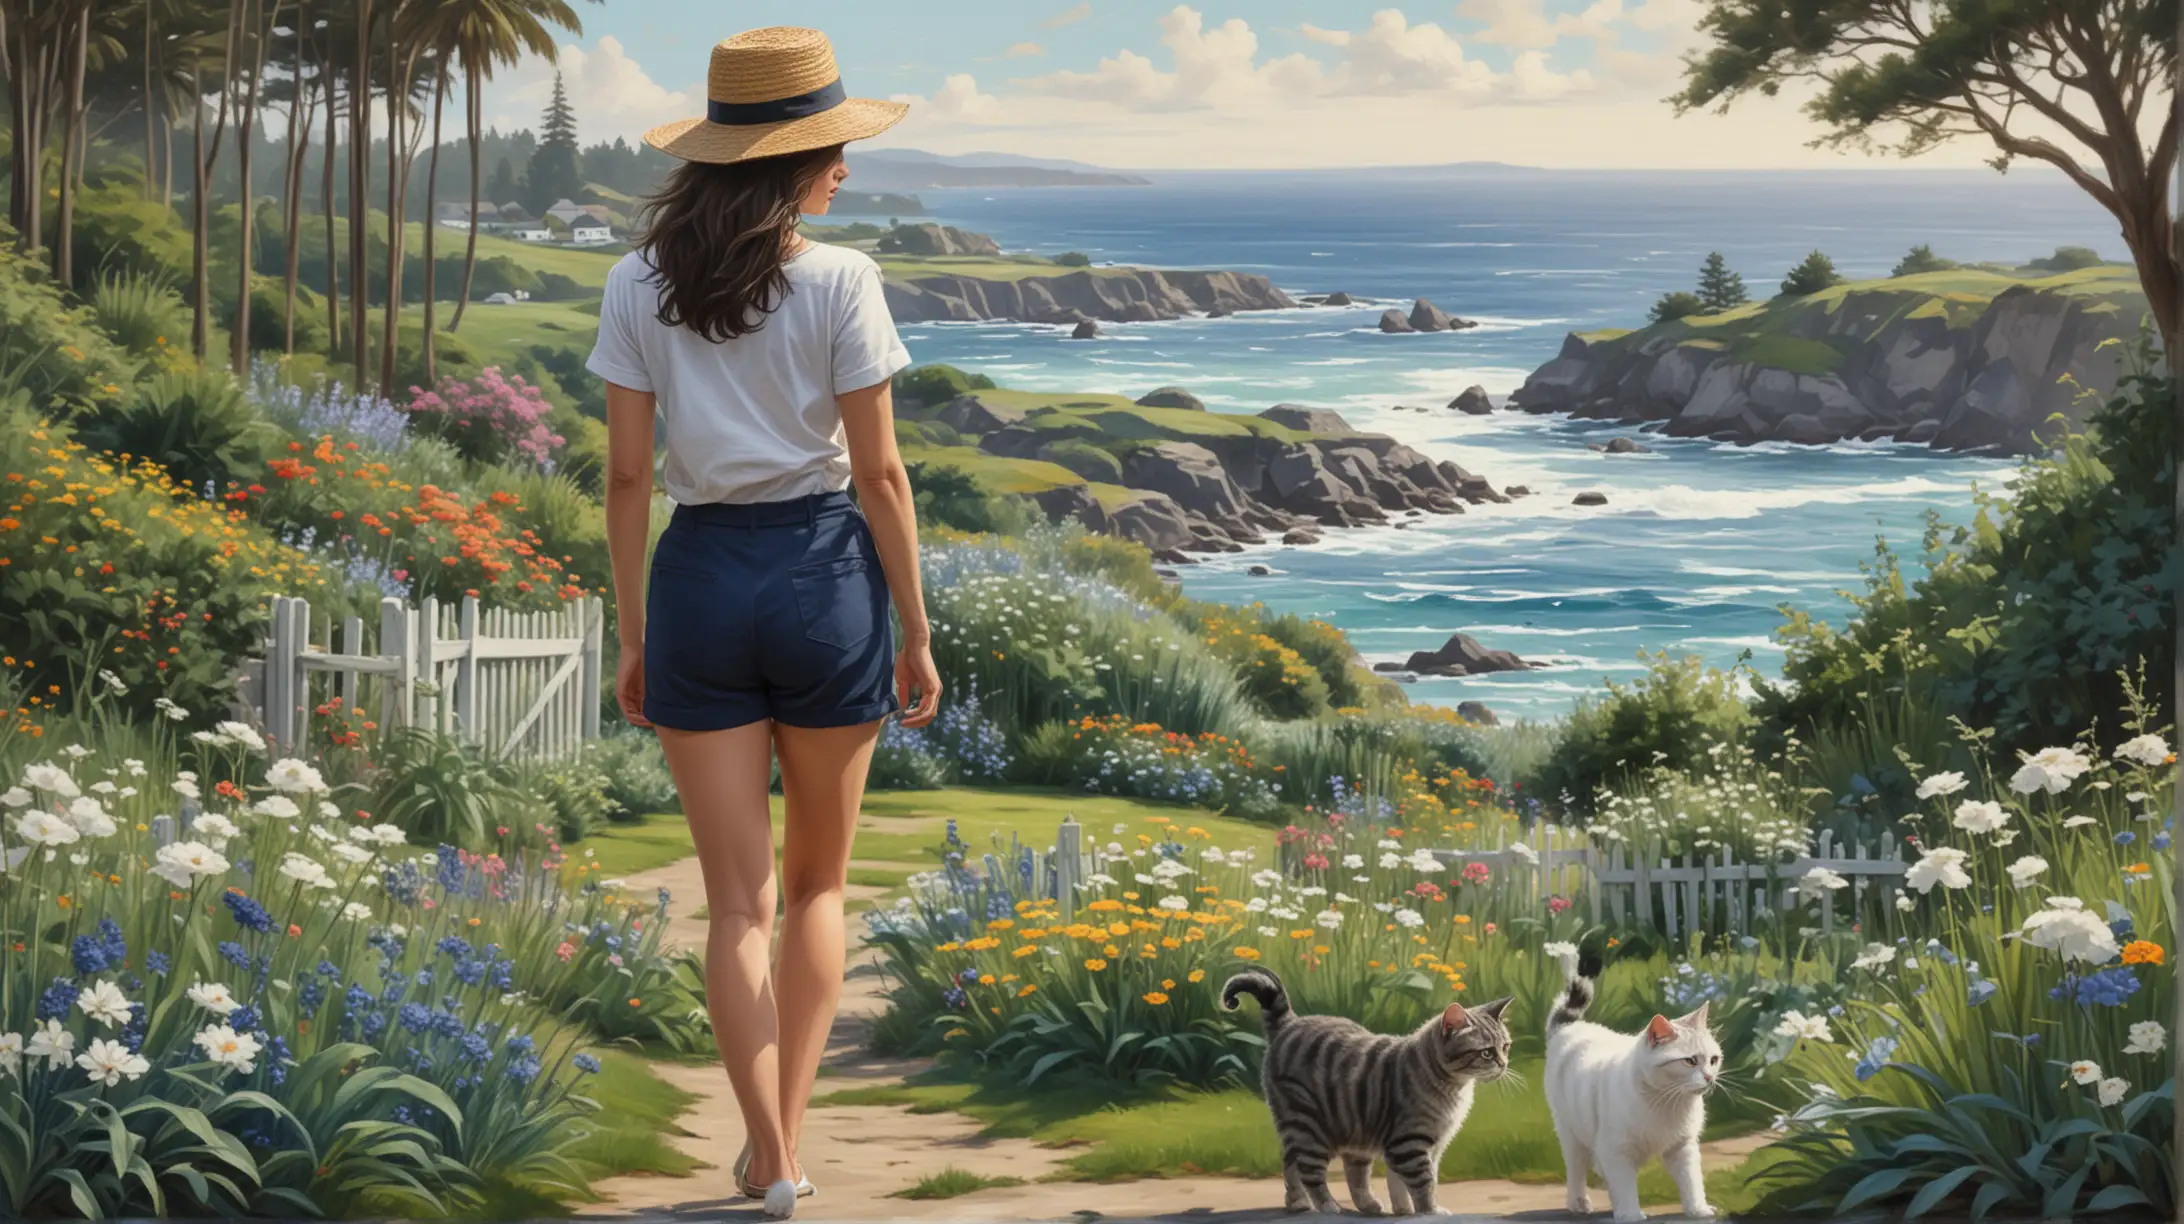 Woman in Straw Hat Walking Through Coastal Garden with Two Cats